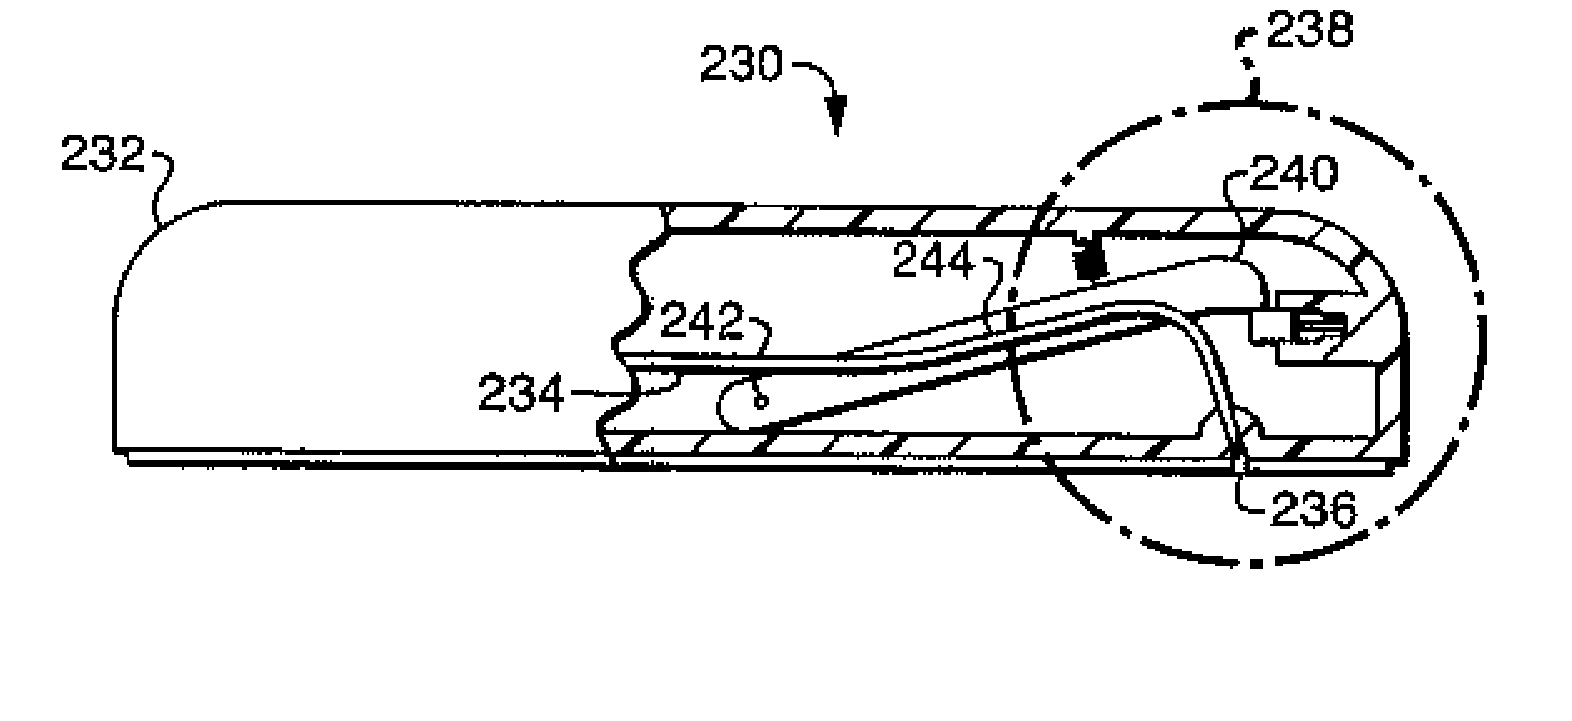 Transcutaneous fluid delivery system